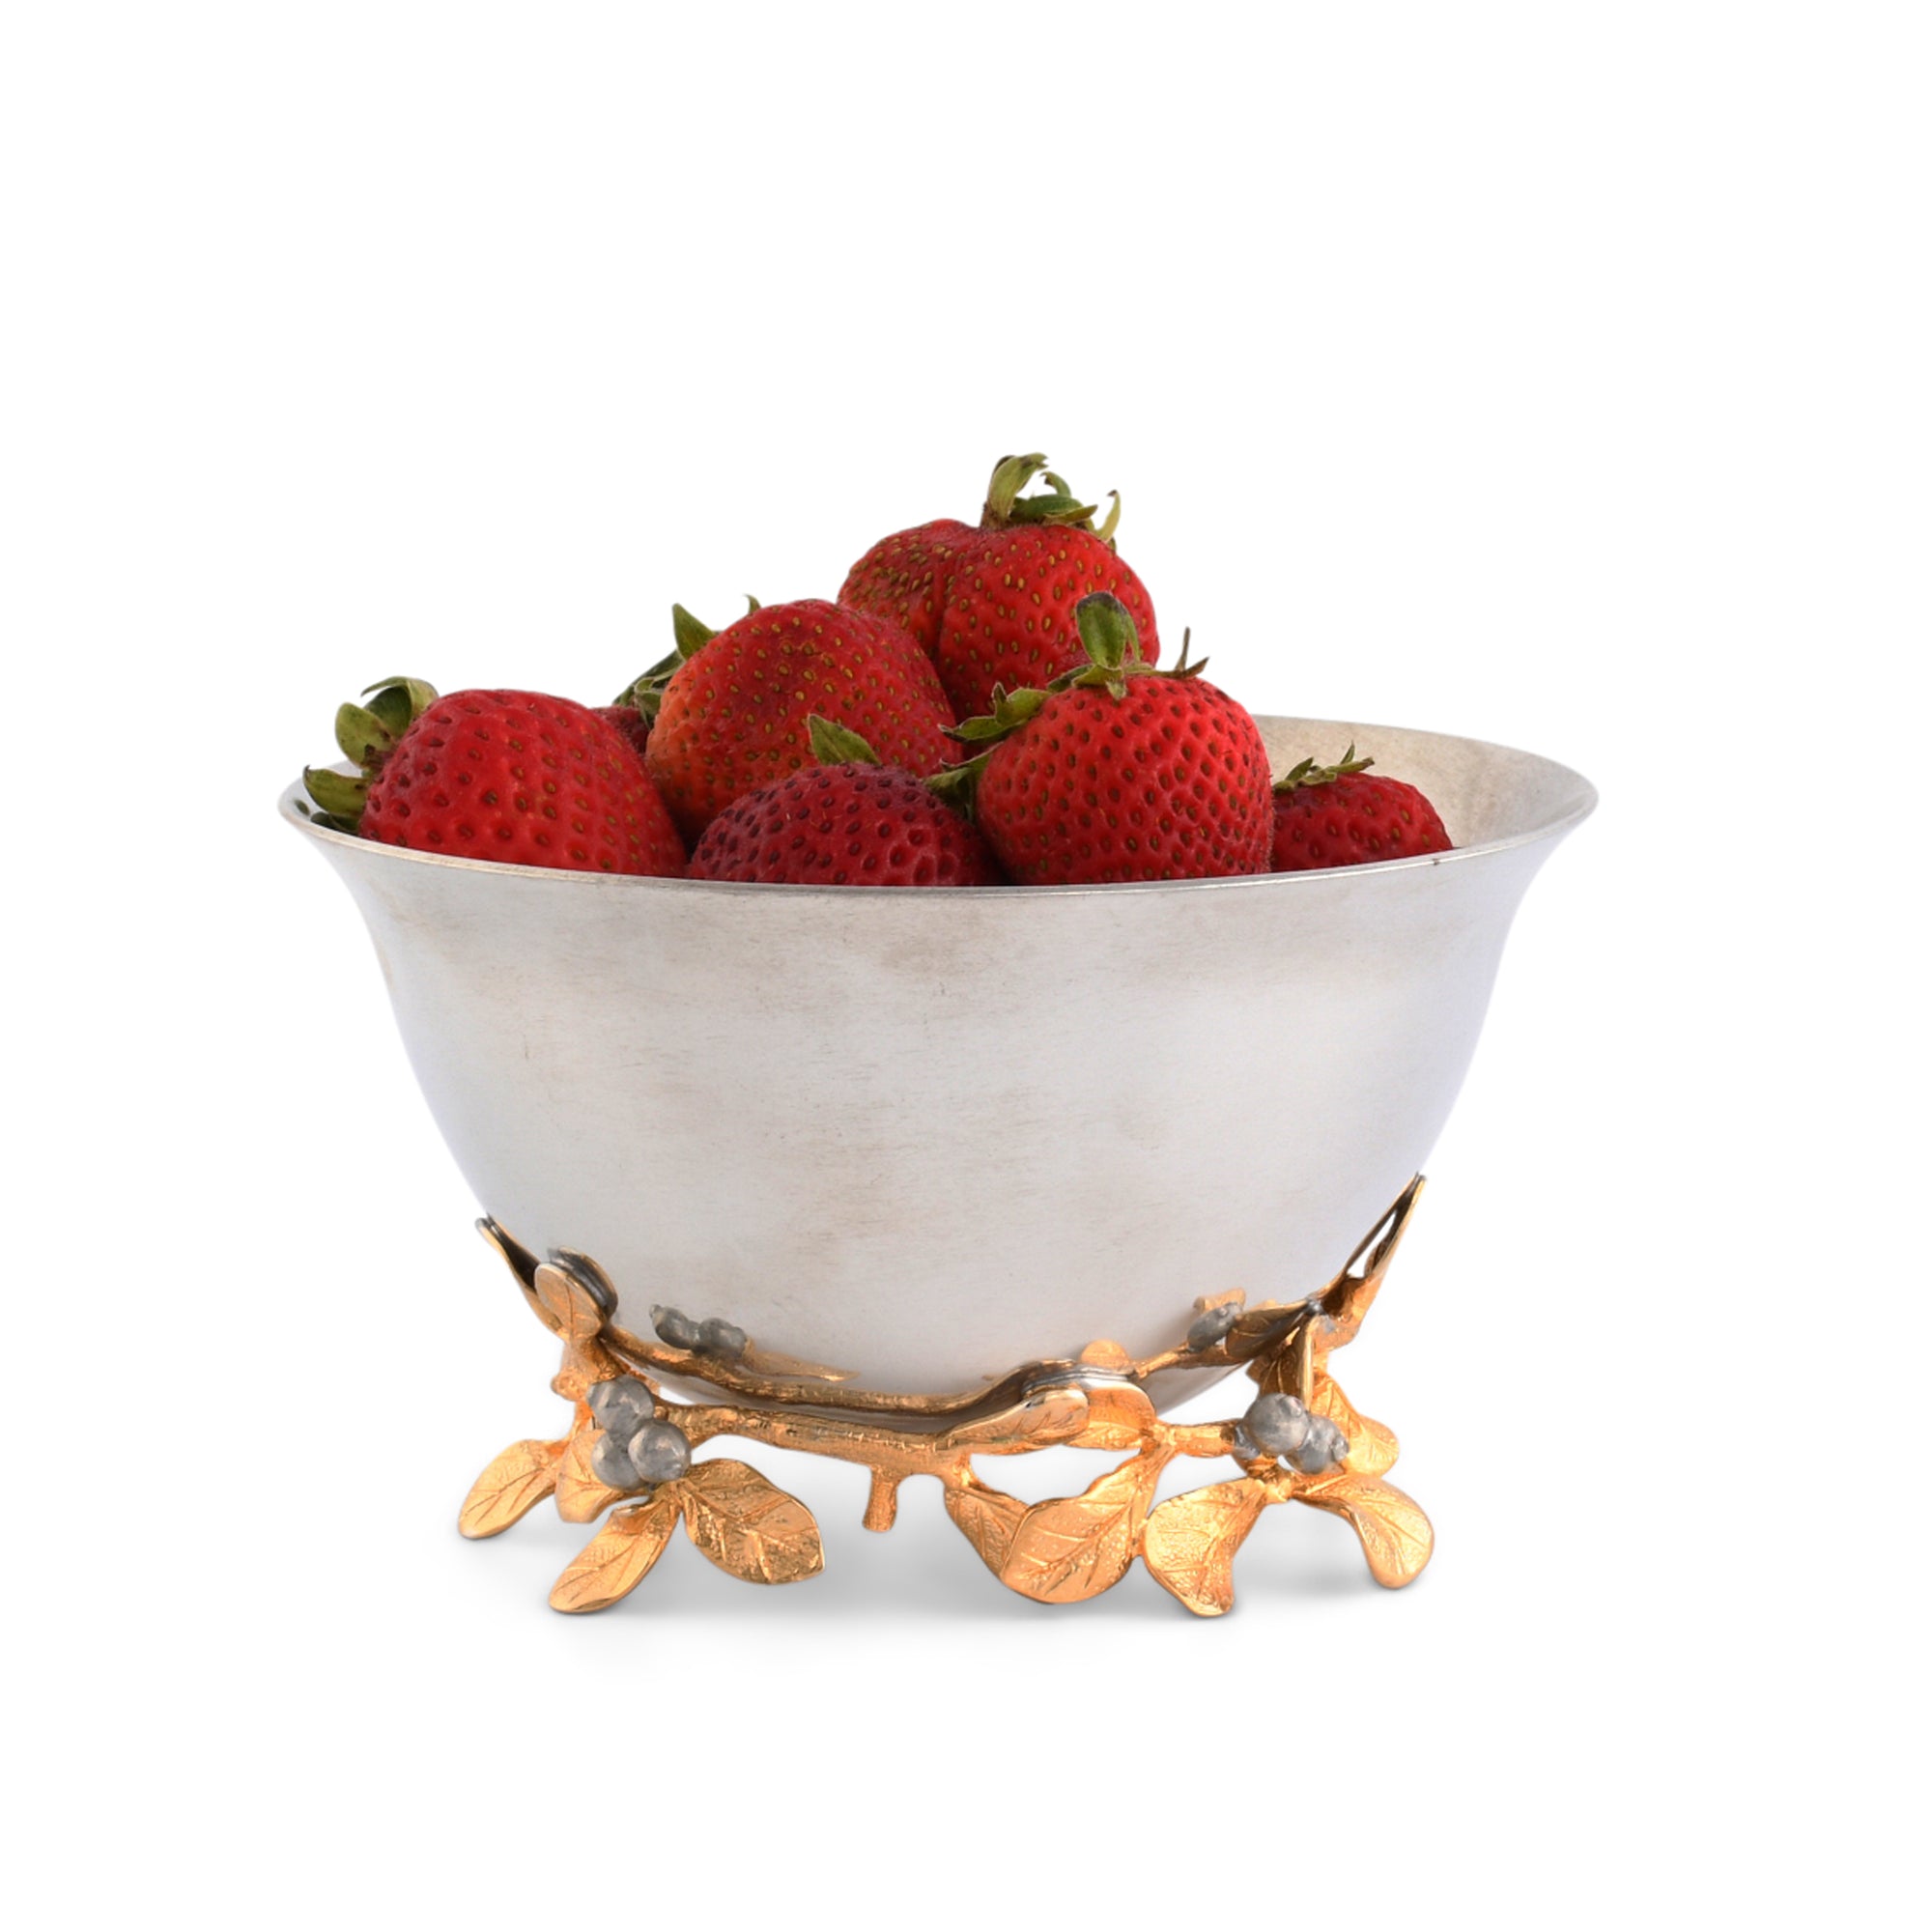 Vagabond House Winter Berry Pewter Bowl Product Image